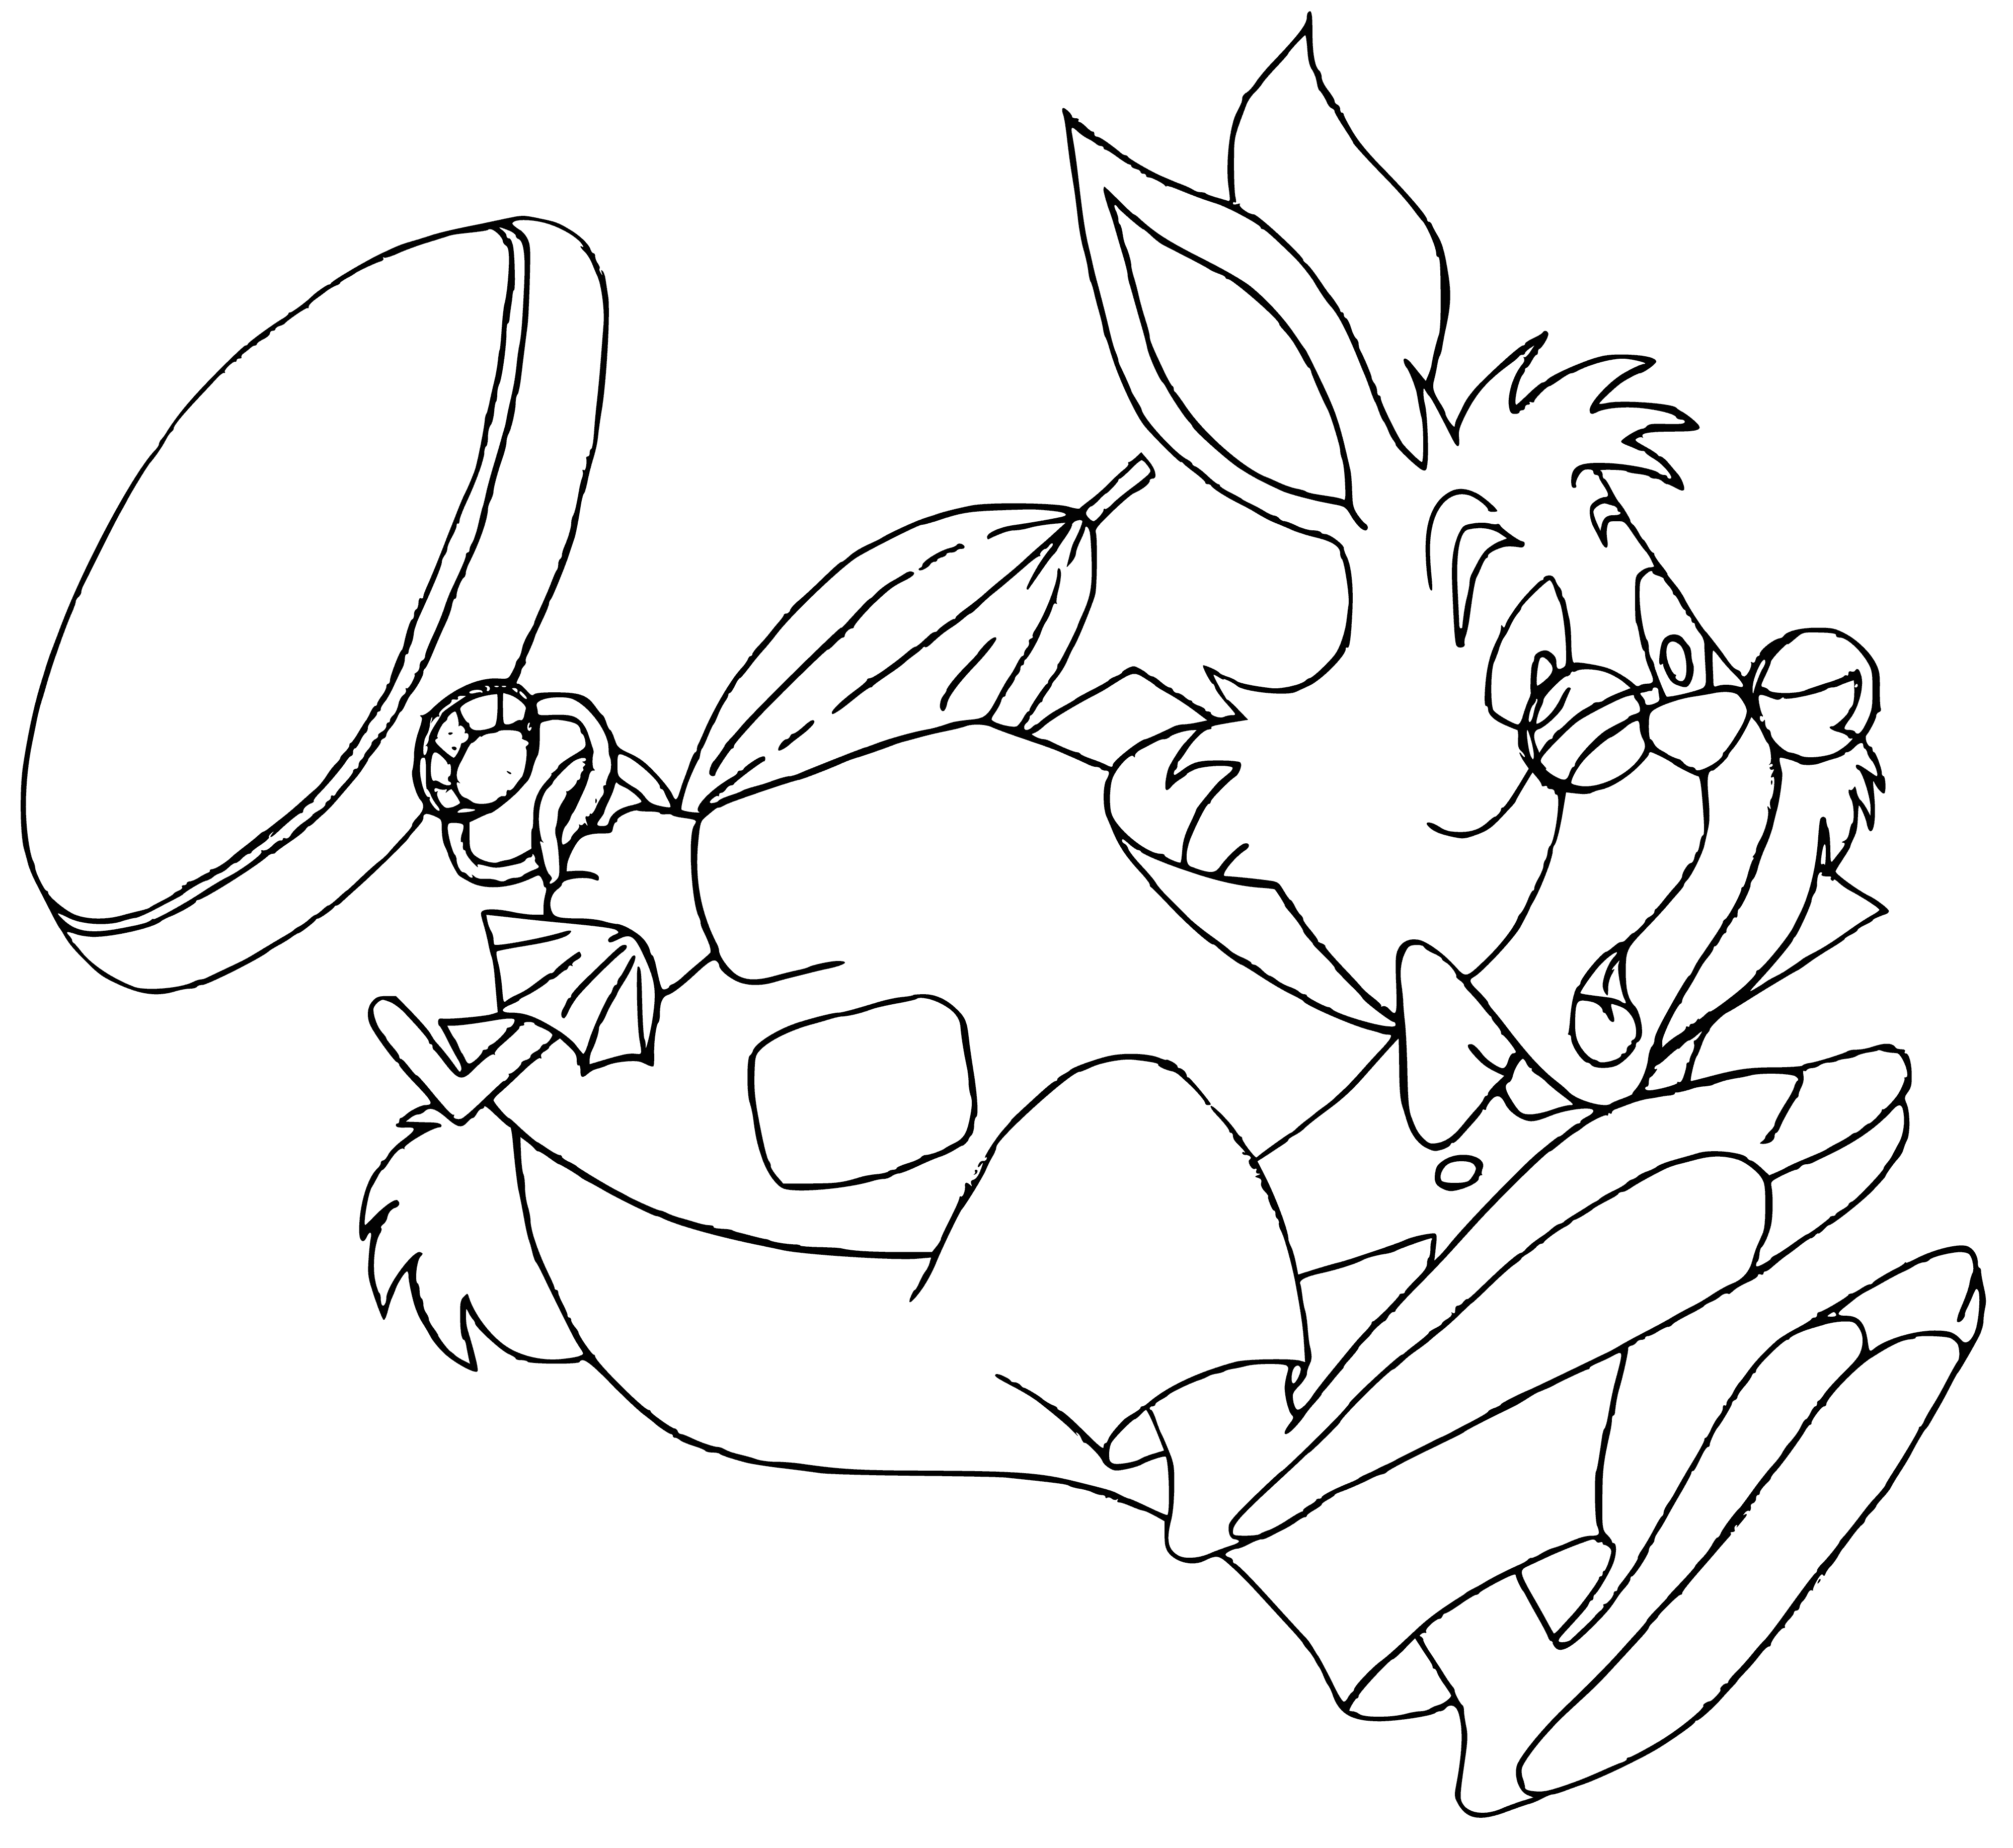 White Rabbit coloring page